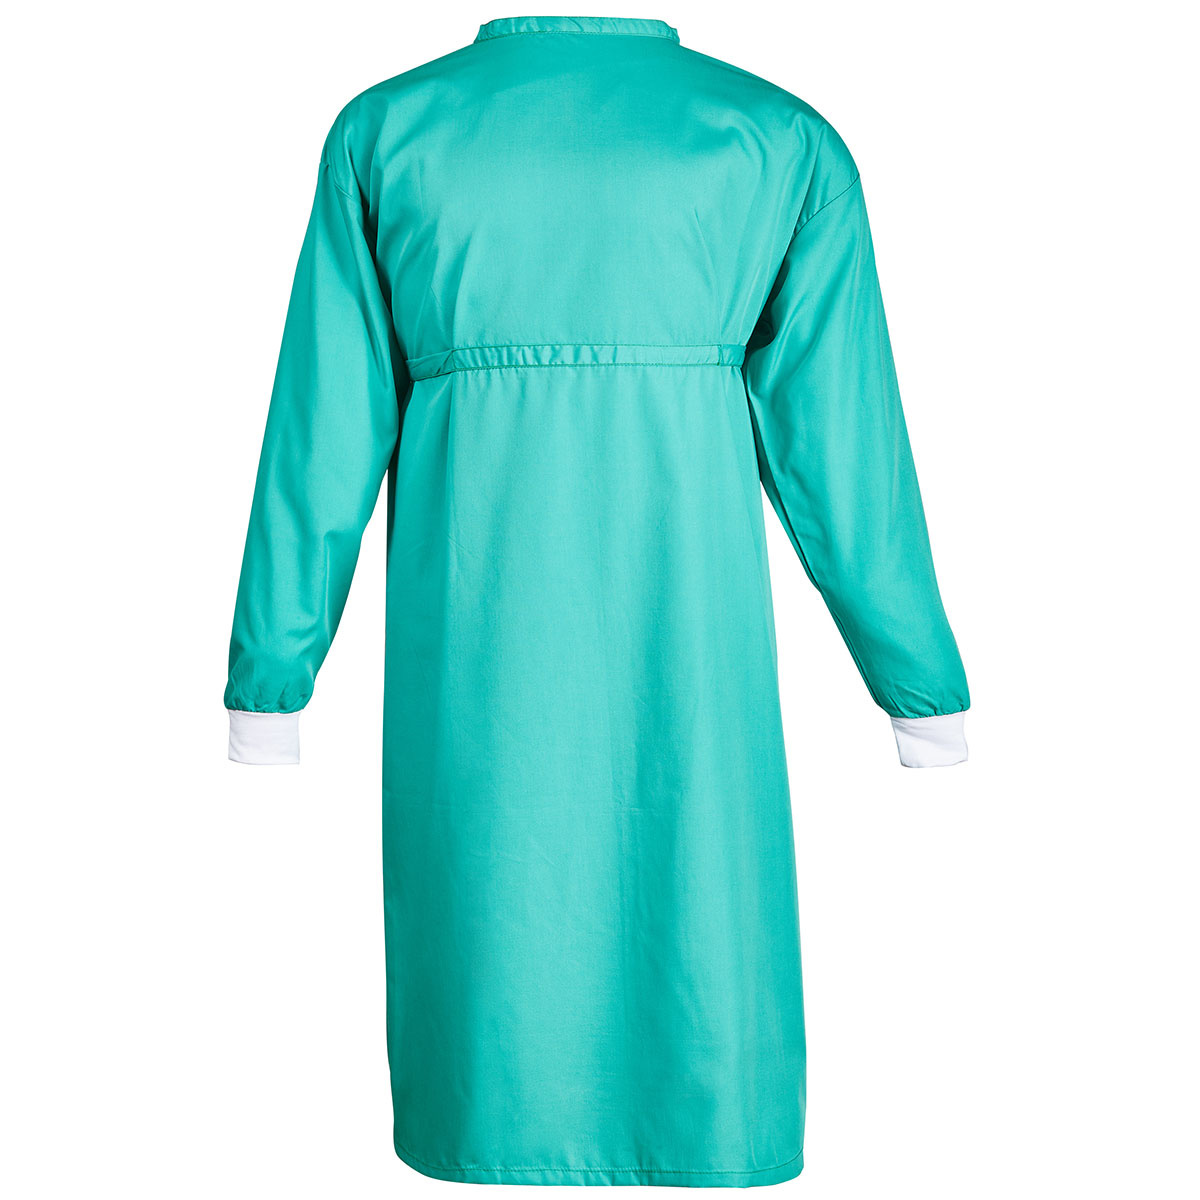 What are the Precautions When Wearing Surgeon Gown in the Operating Room?